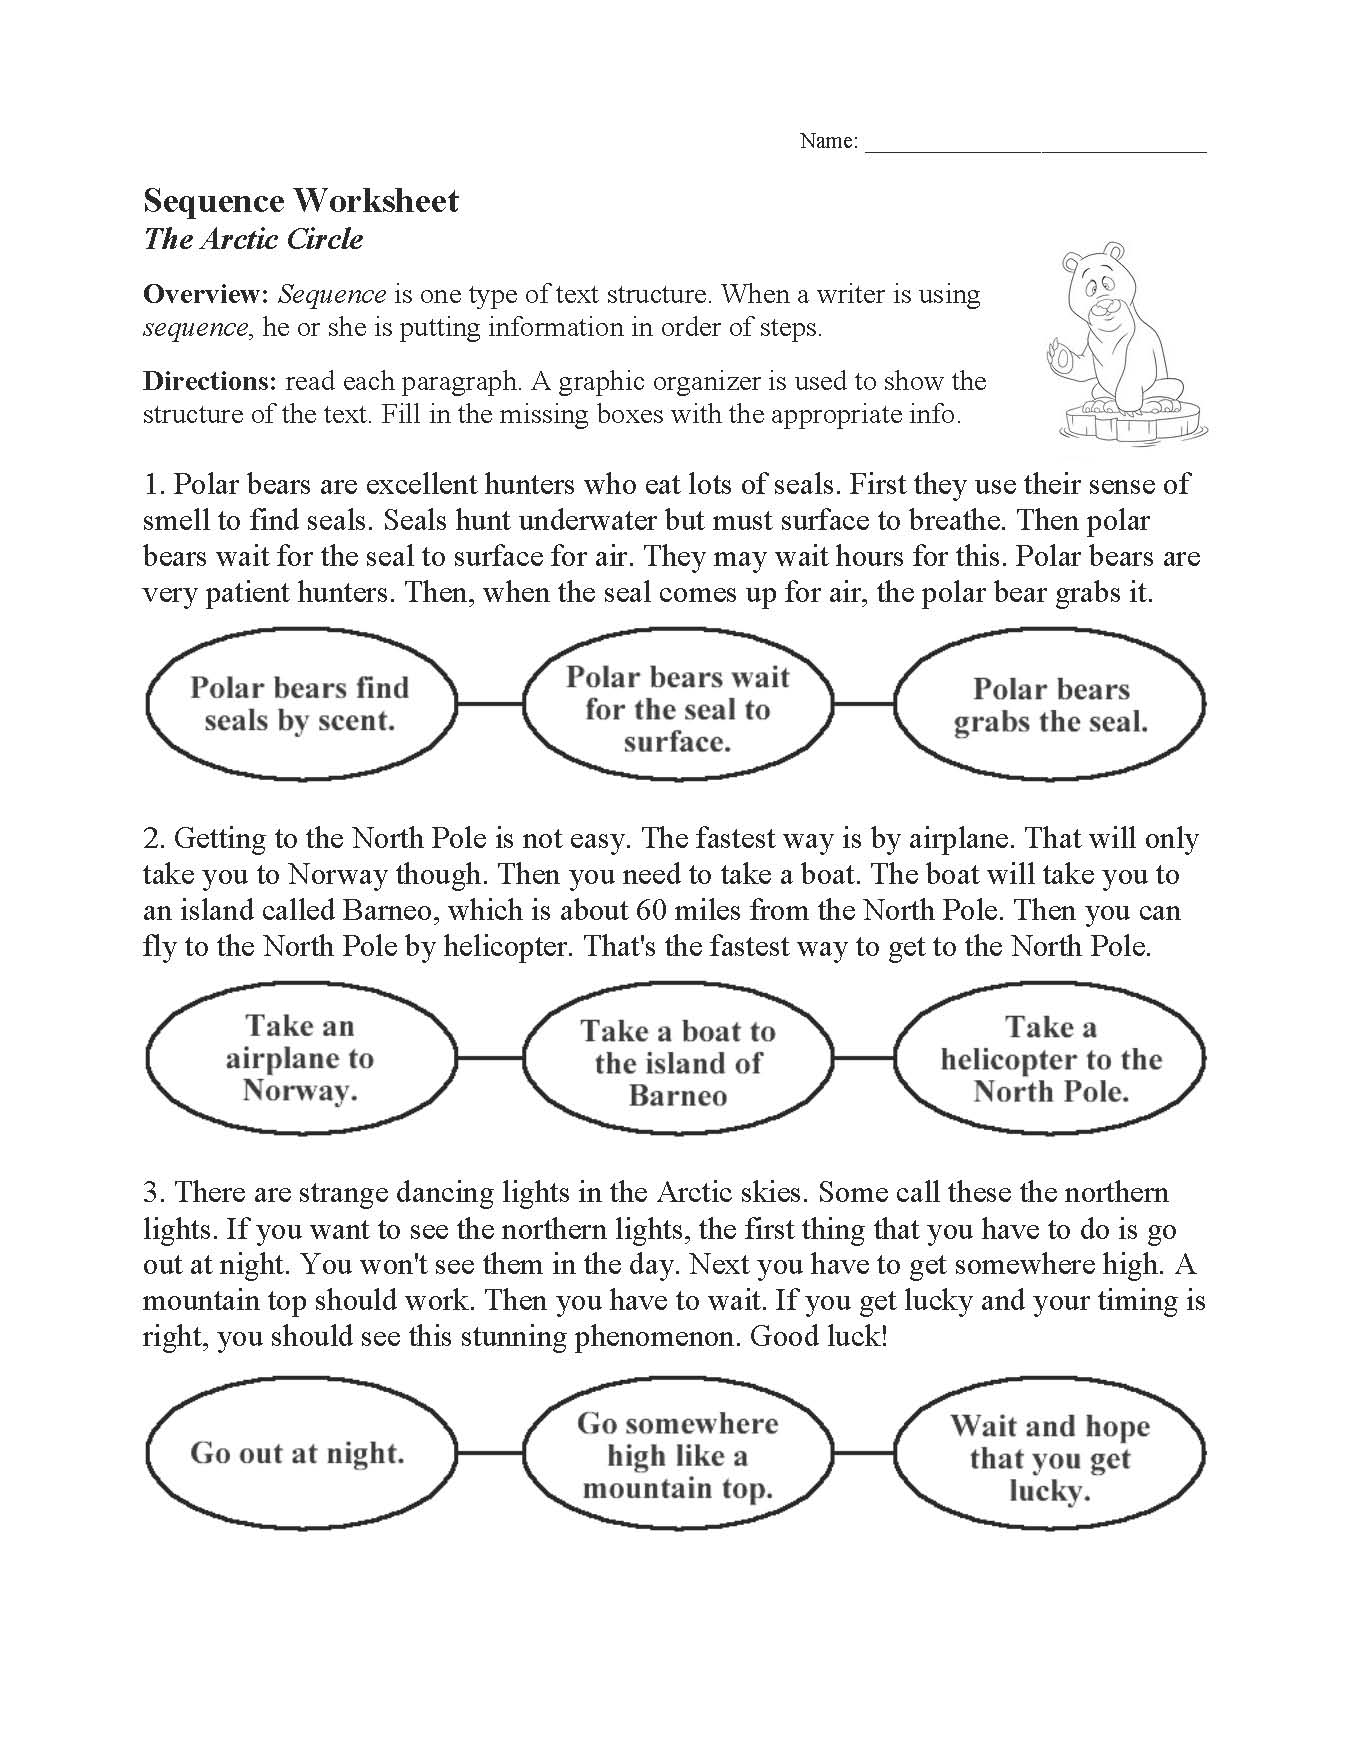 This is a preview image of our Sequence Worksheet. Click on it to enlarge or view the source file.